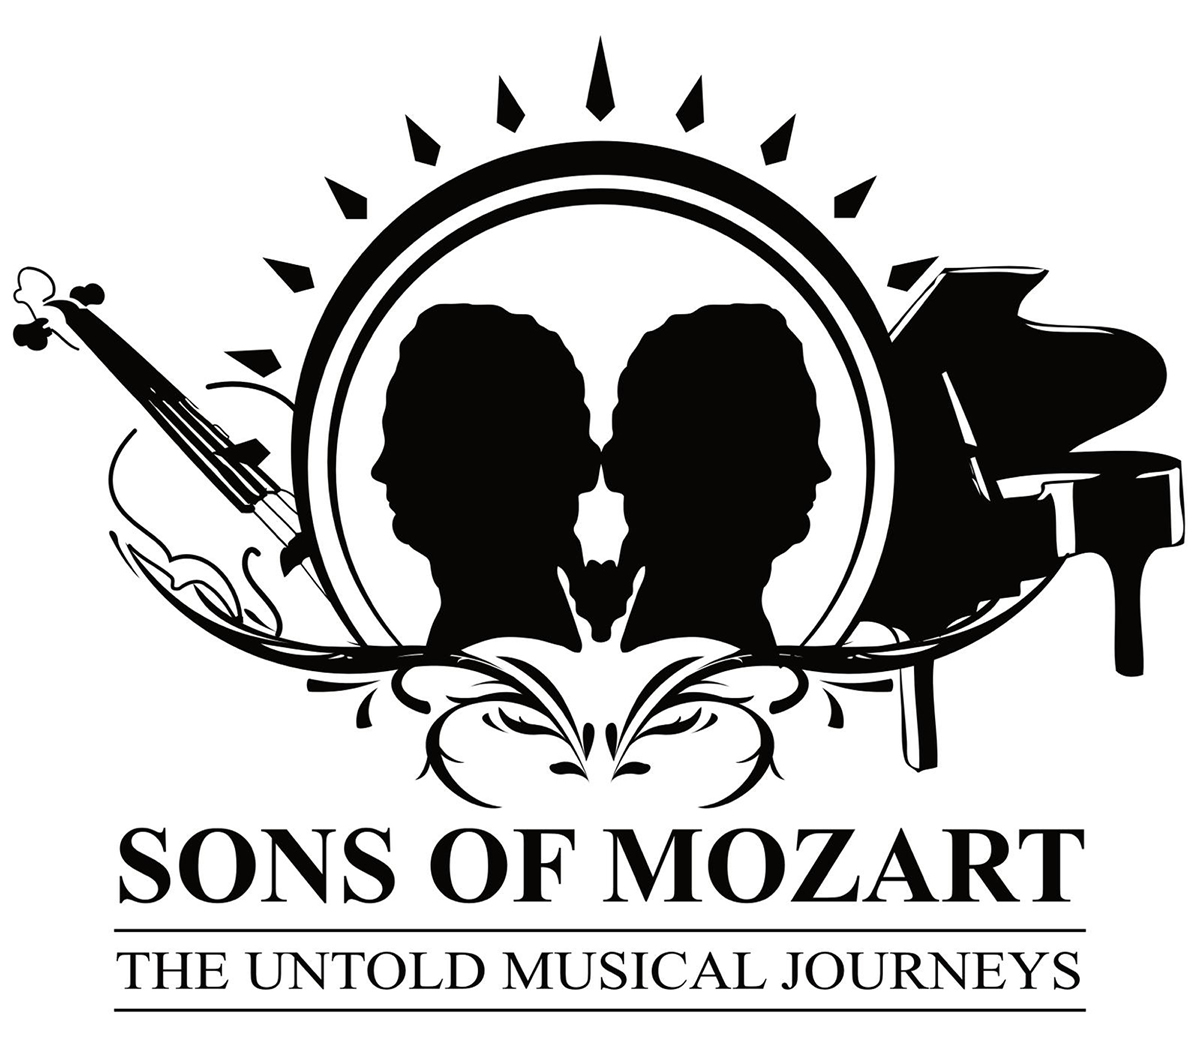 Sons of Mozart - The Untold Musical Journeys